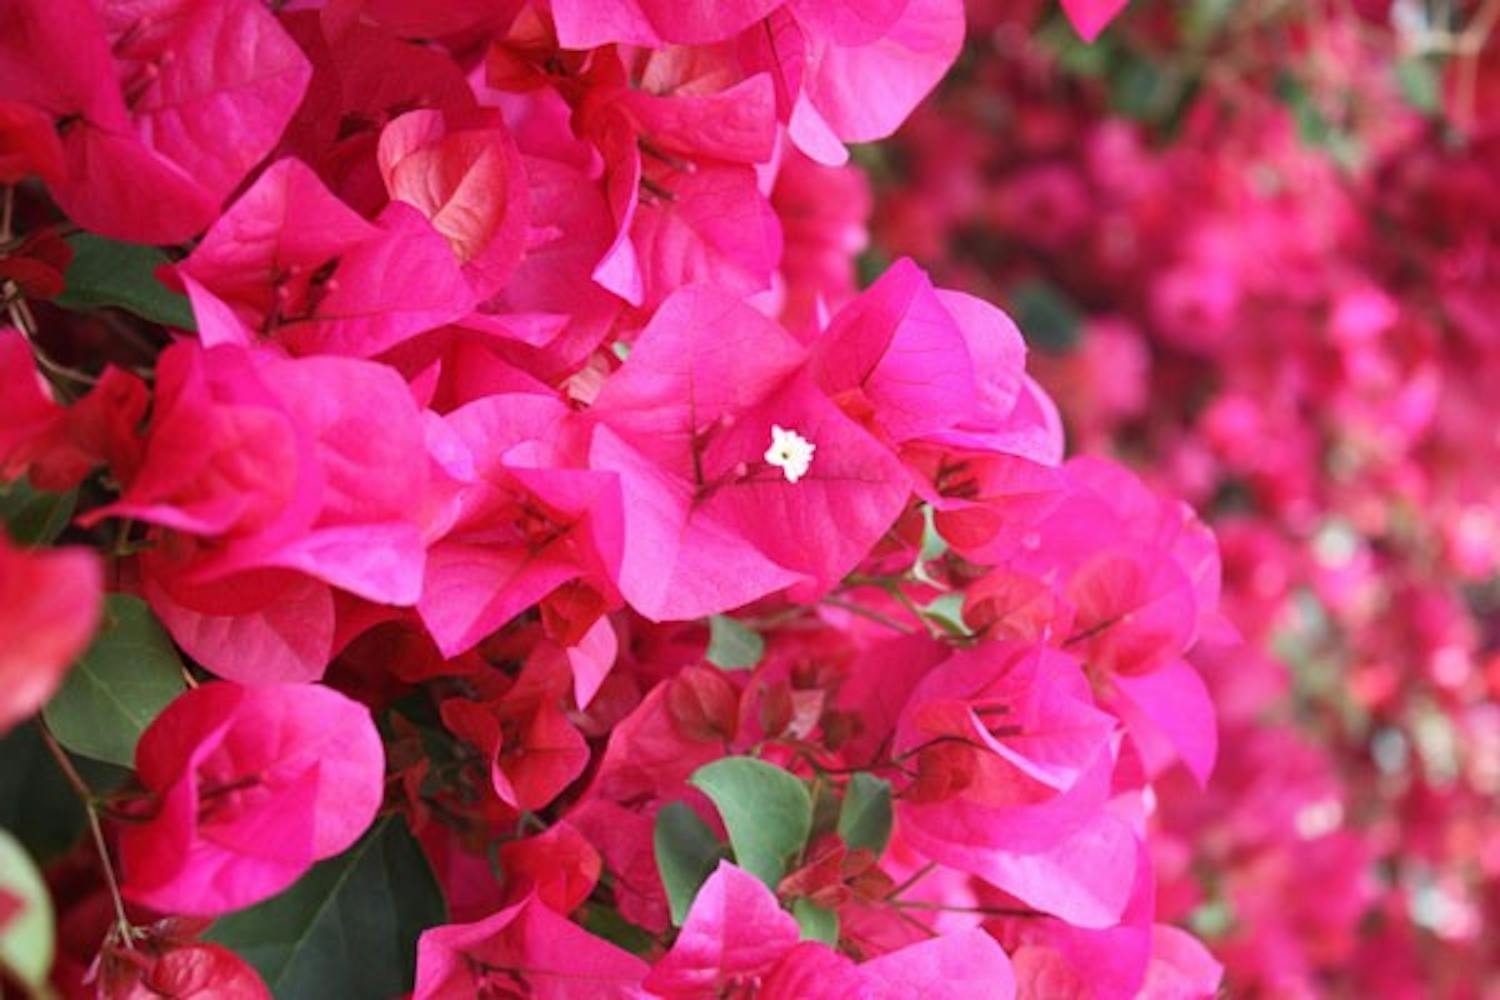 PRETTY IN PINK: The Bougainvillea plants are filled with bright pink flowers all over the ASU West campus. (Photo by Jessica Weisel)